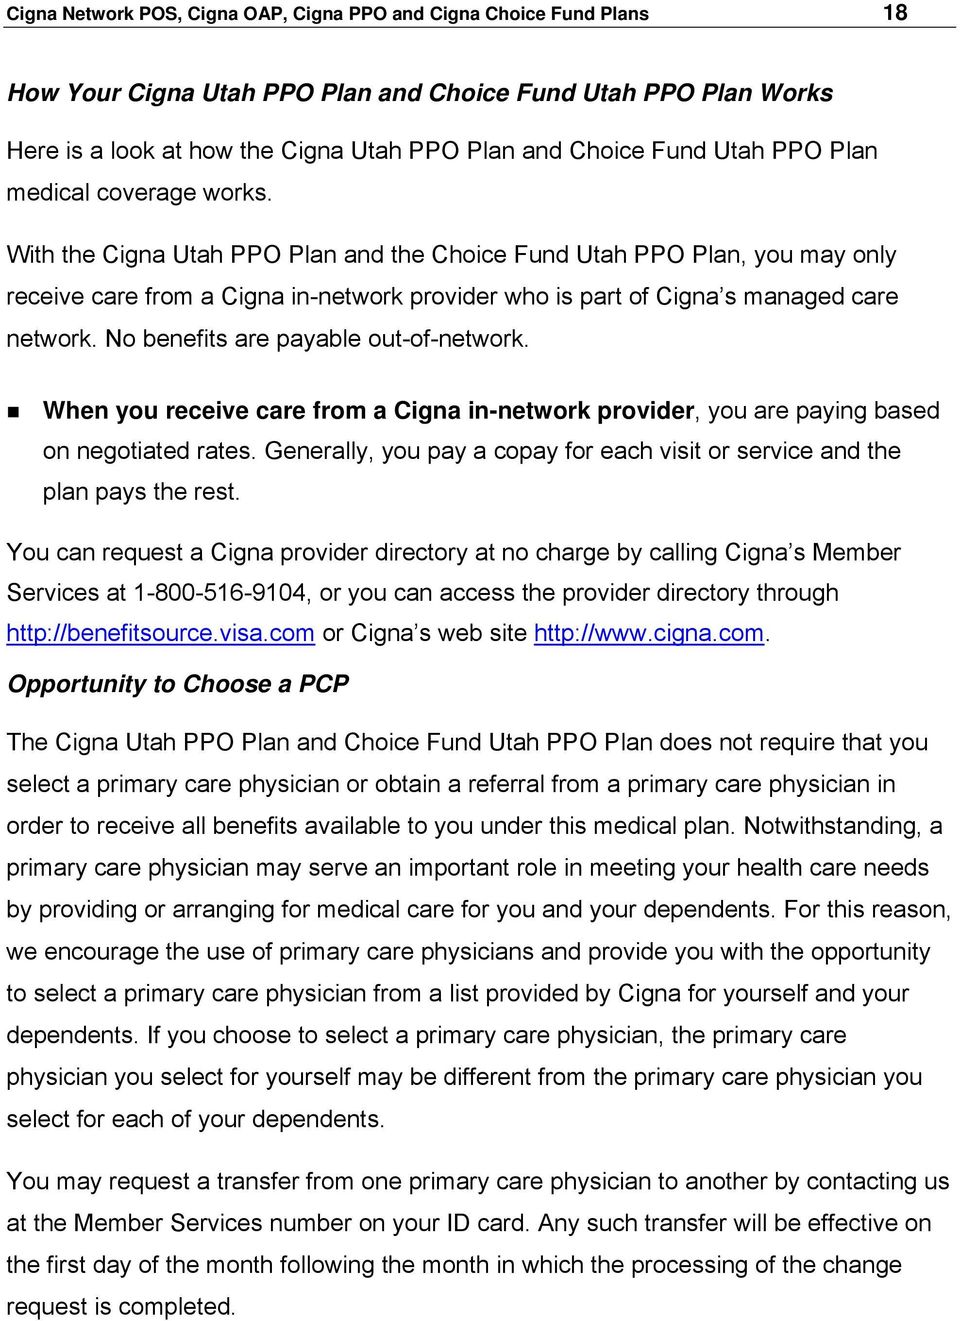 With the Cigna Utah PPO Plan and the Choice Fund Utah PPO Plan, you may only receive care from a Cigna in-network provider who is part of Cigna s managed care network.